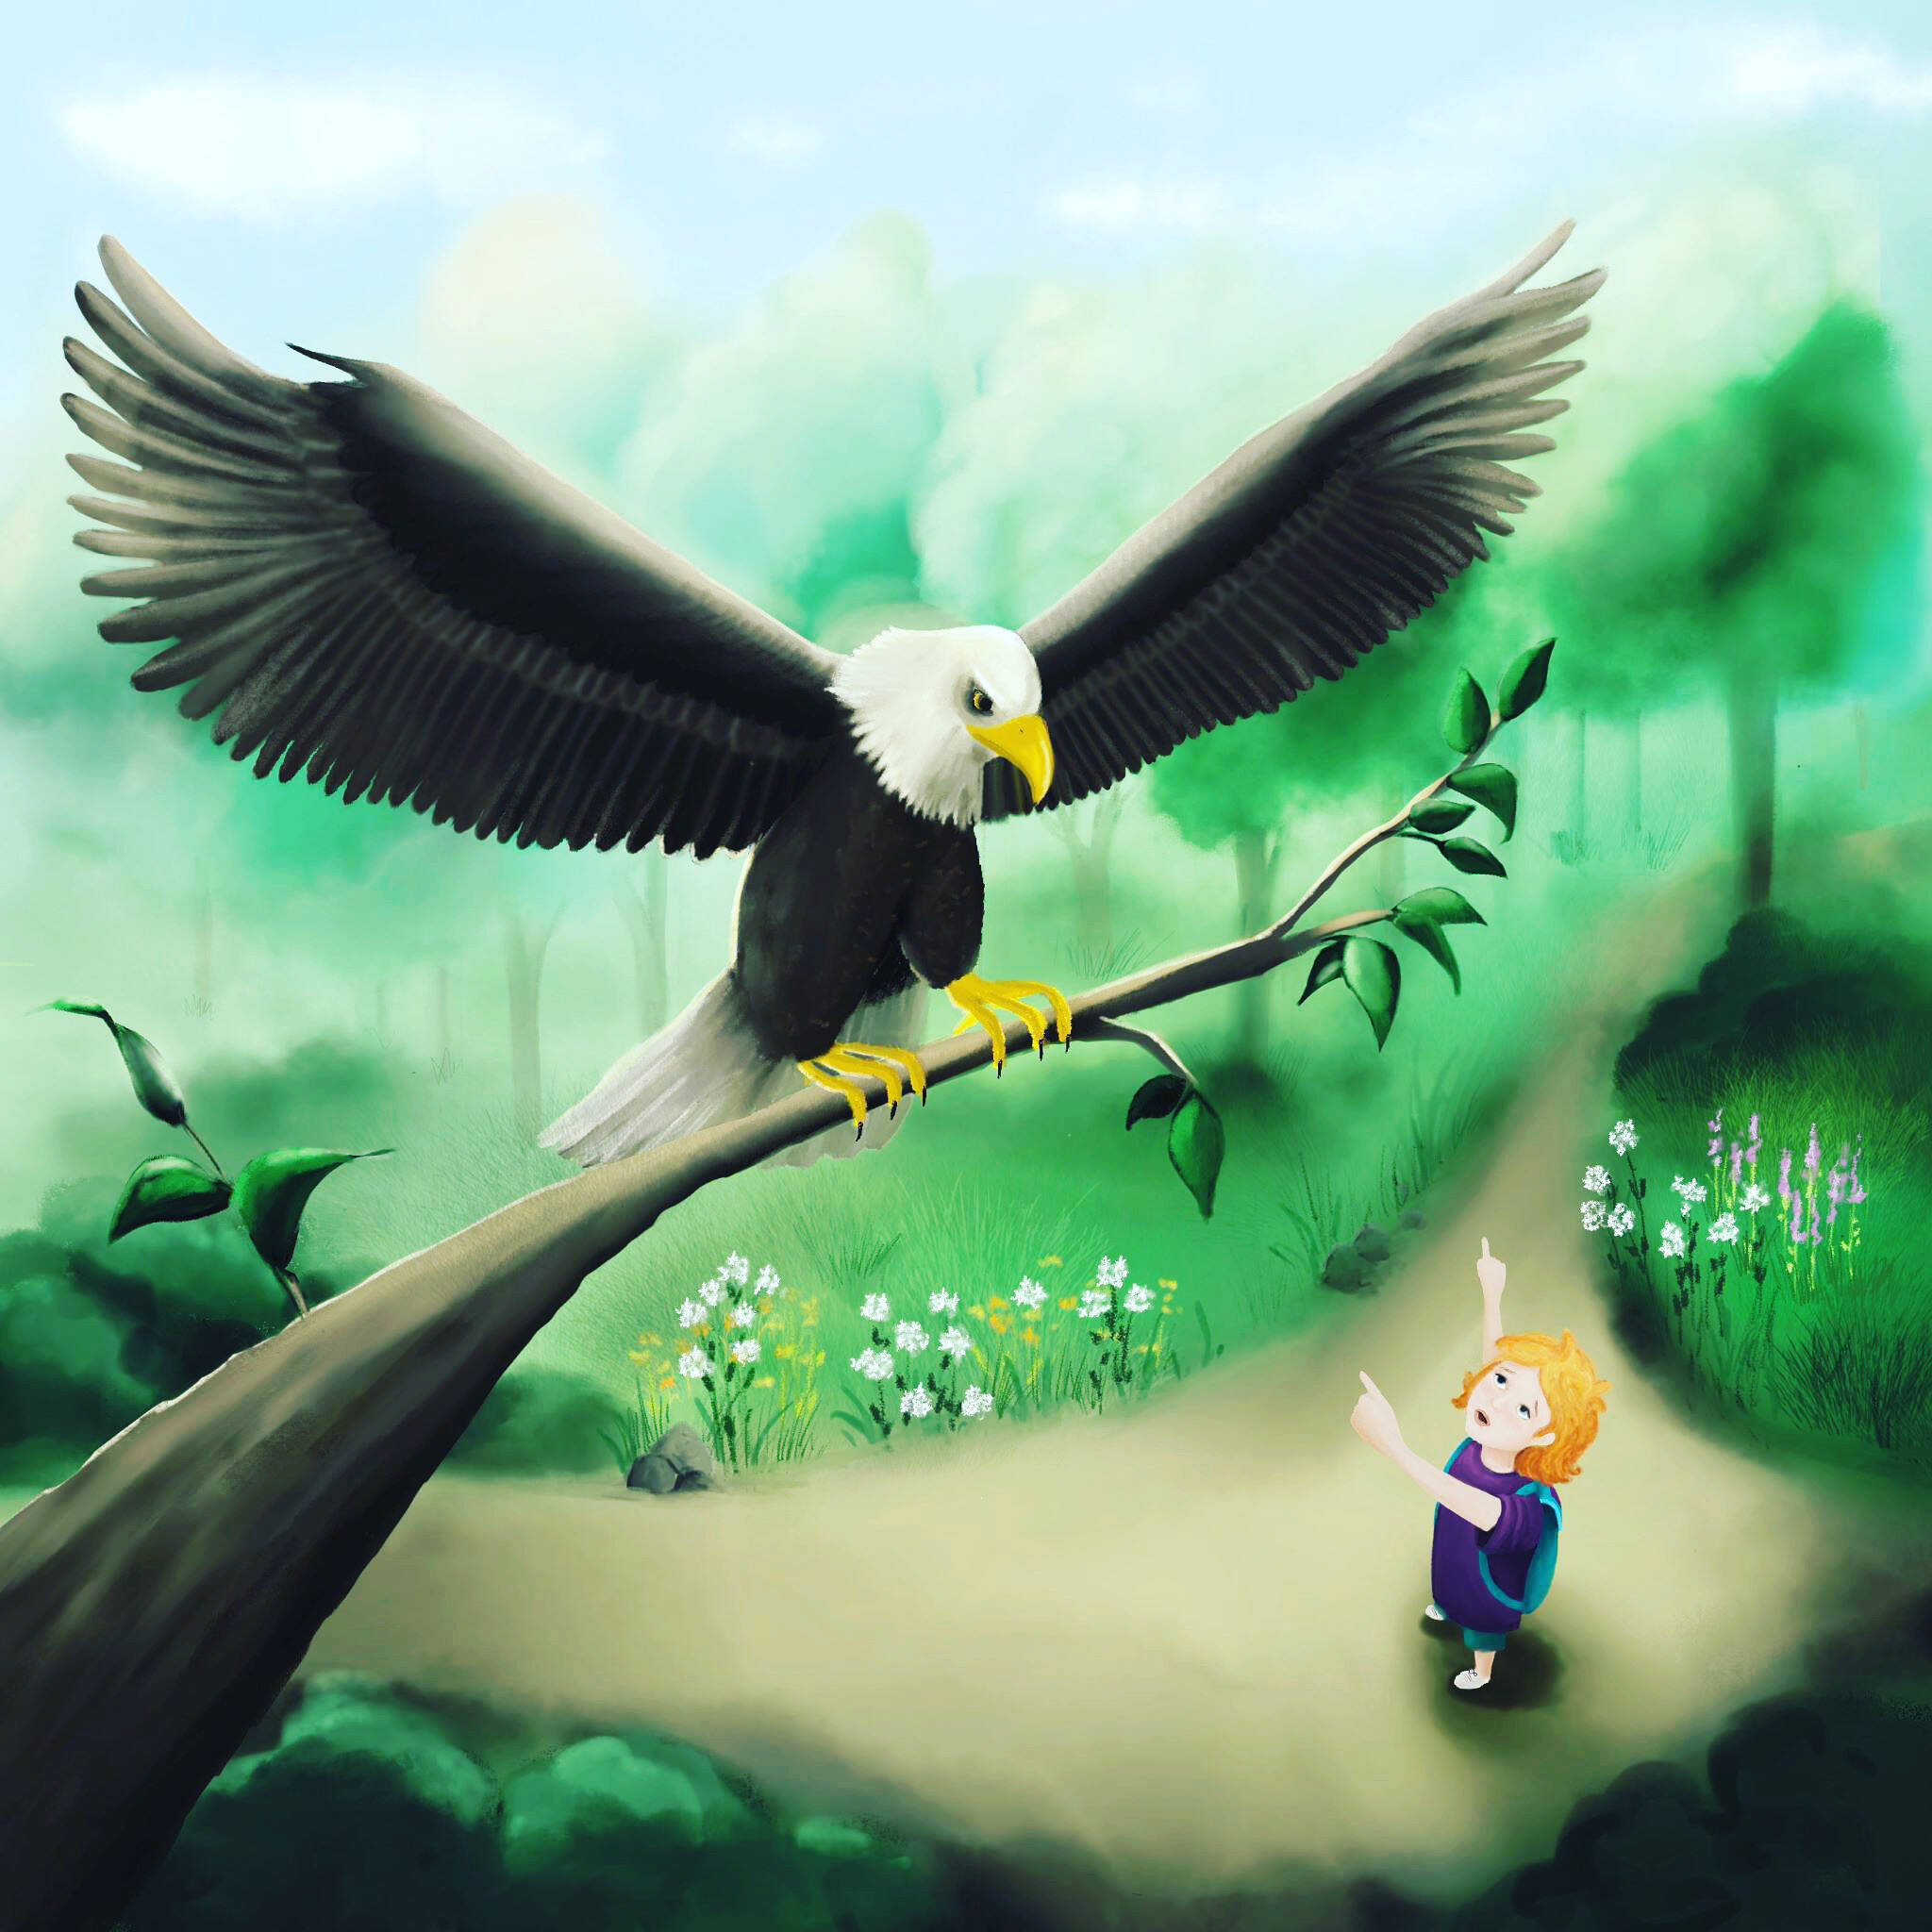 Frankie meets several creatures along the journey, including this eagle. (Illustration provided)